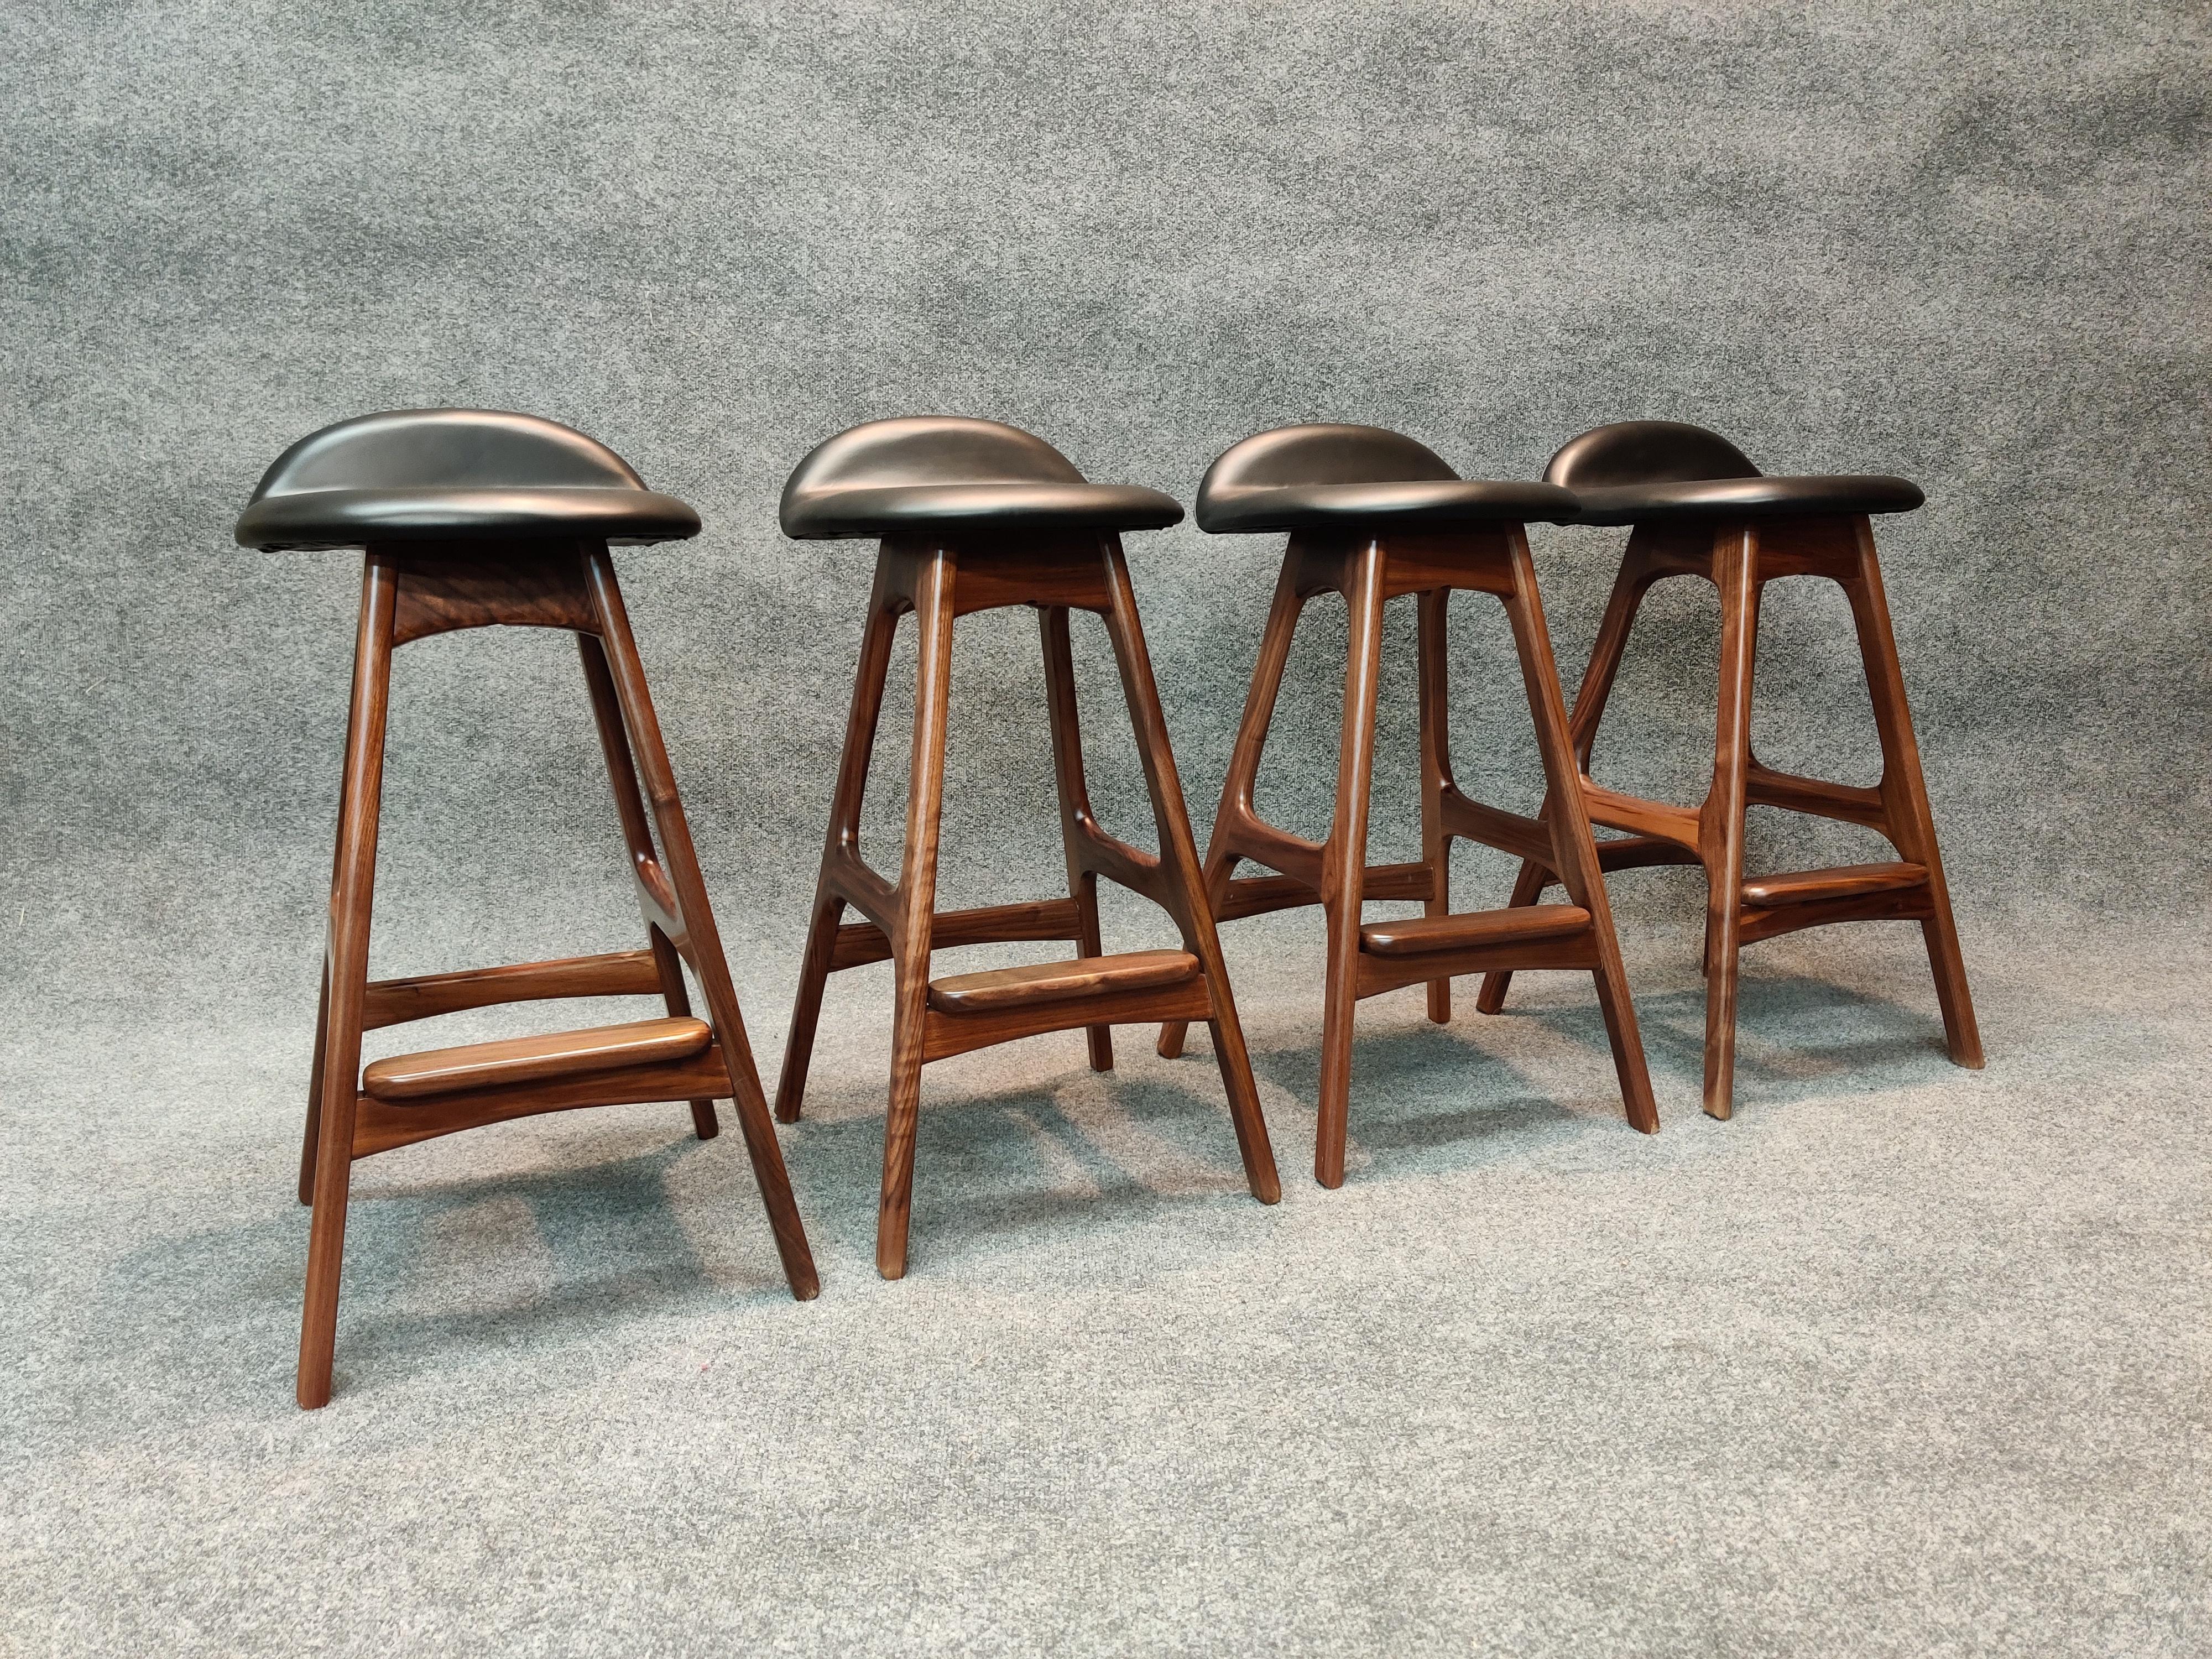 Designed by Erik Buck in the 1960s, this high quality reproduction of the Buch Counter Stool has an organic and functional structure which is characteristic of the inimitable Danish design language. Its smooth form creates a casual effect of